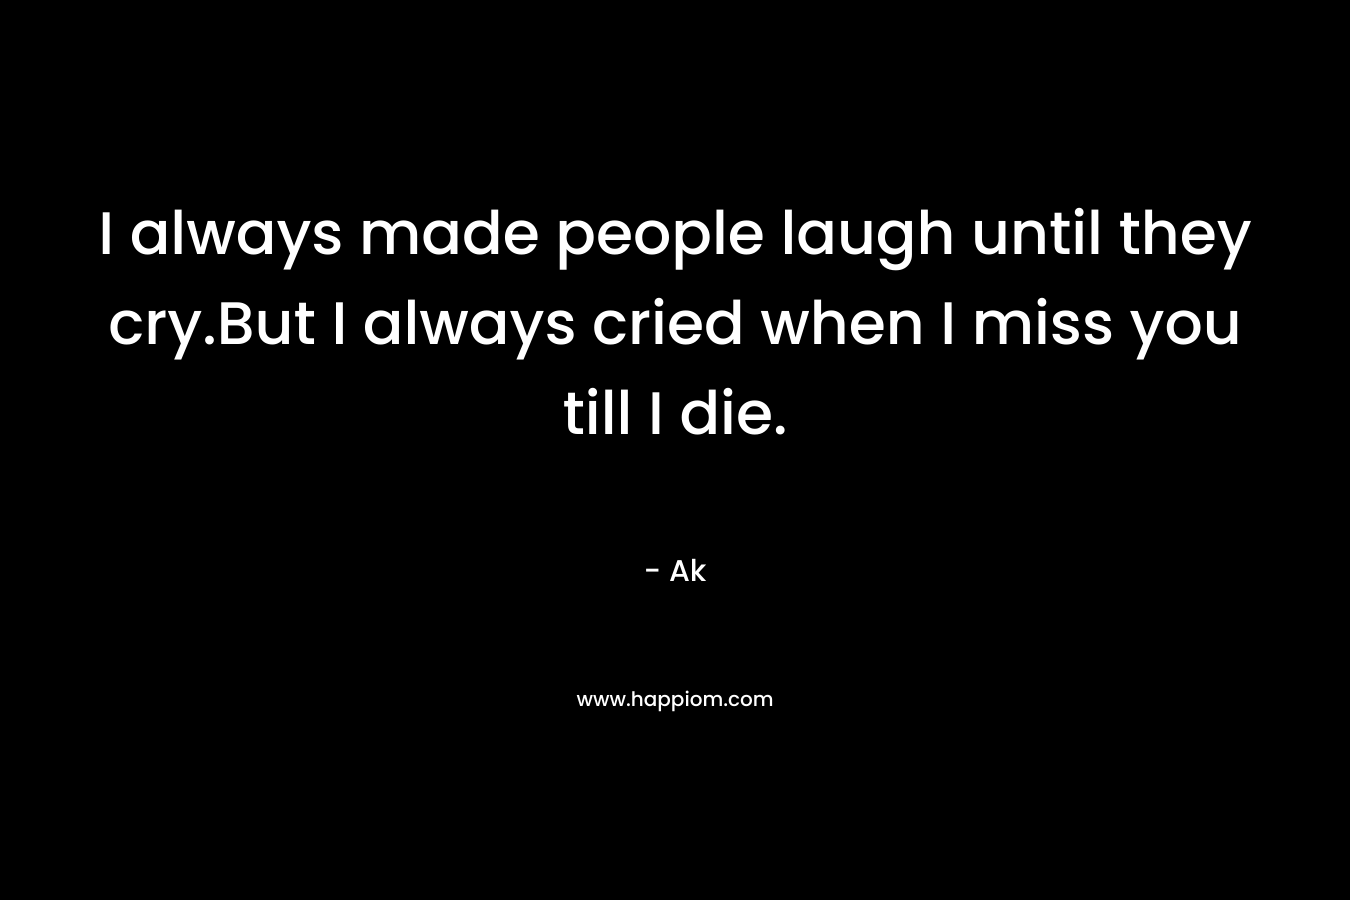 I always made people laugh until they cry.But I always cried when I miss you till I die. – Ak